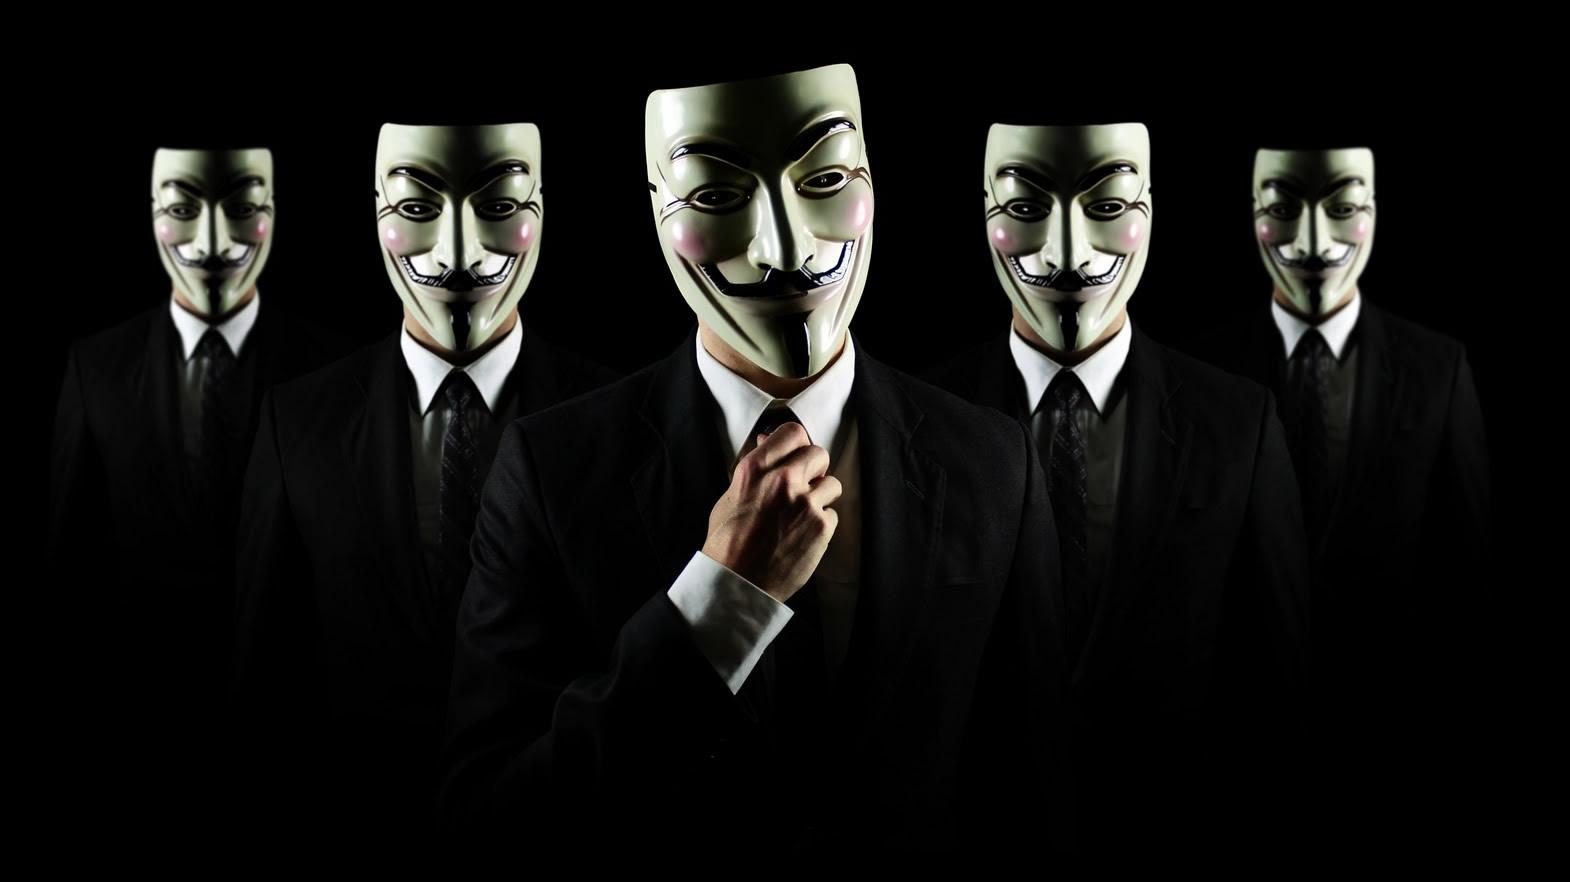 Anonymous hacks african governments